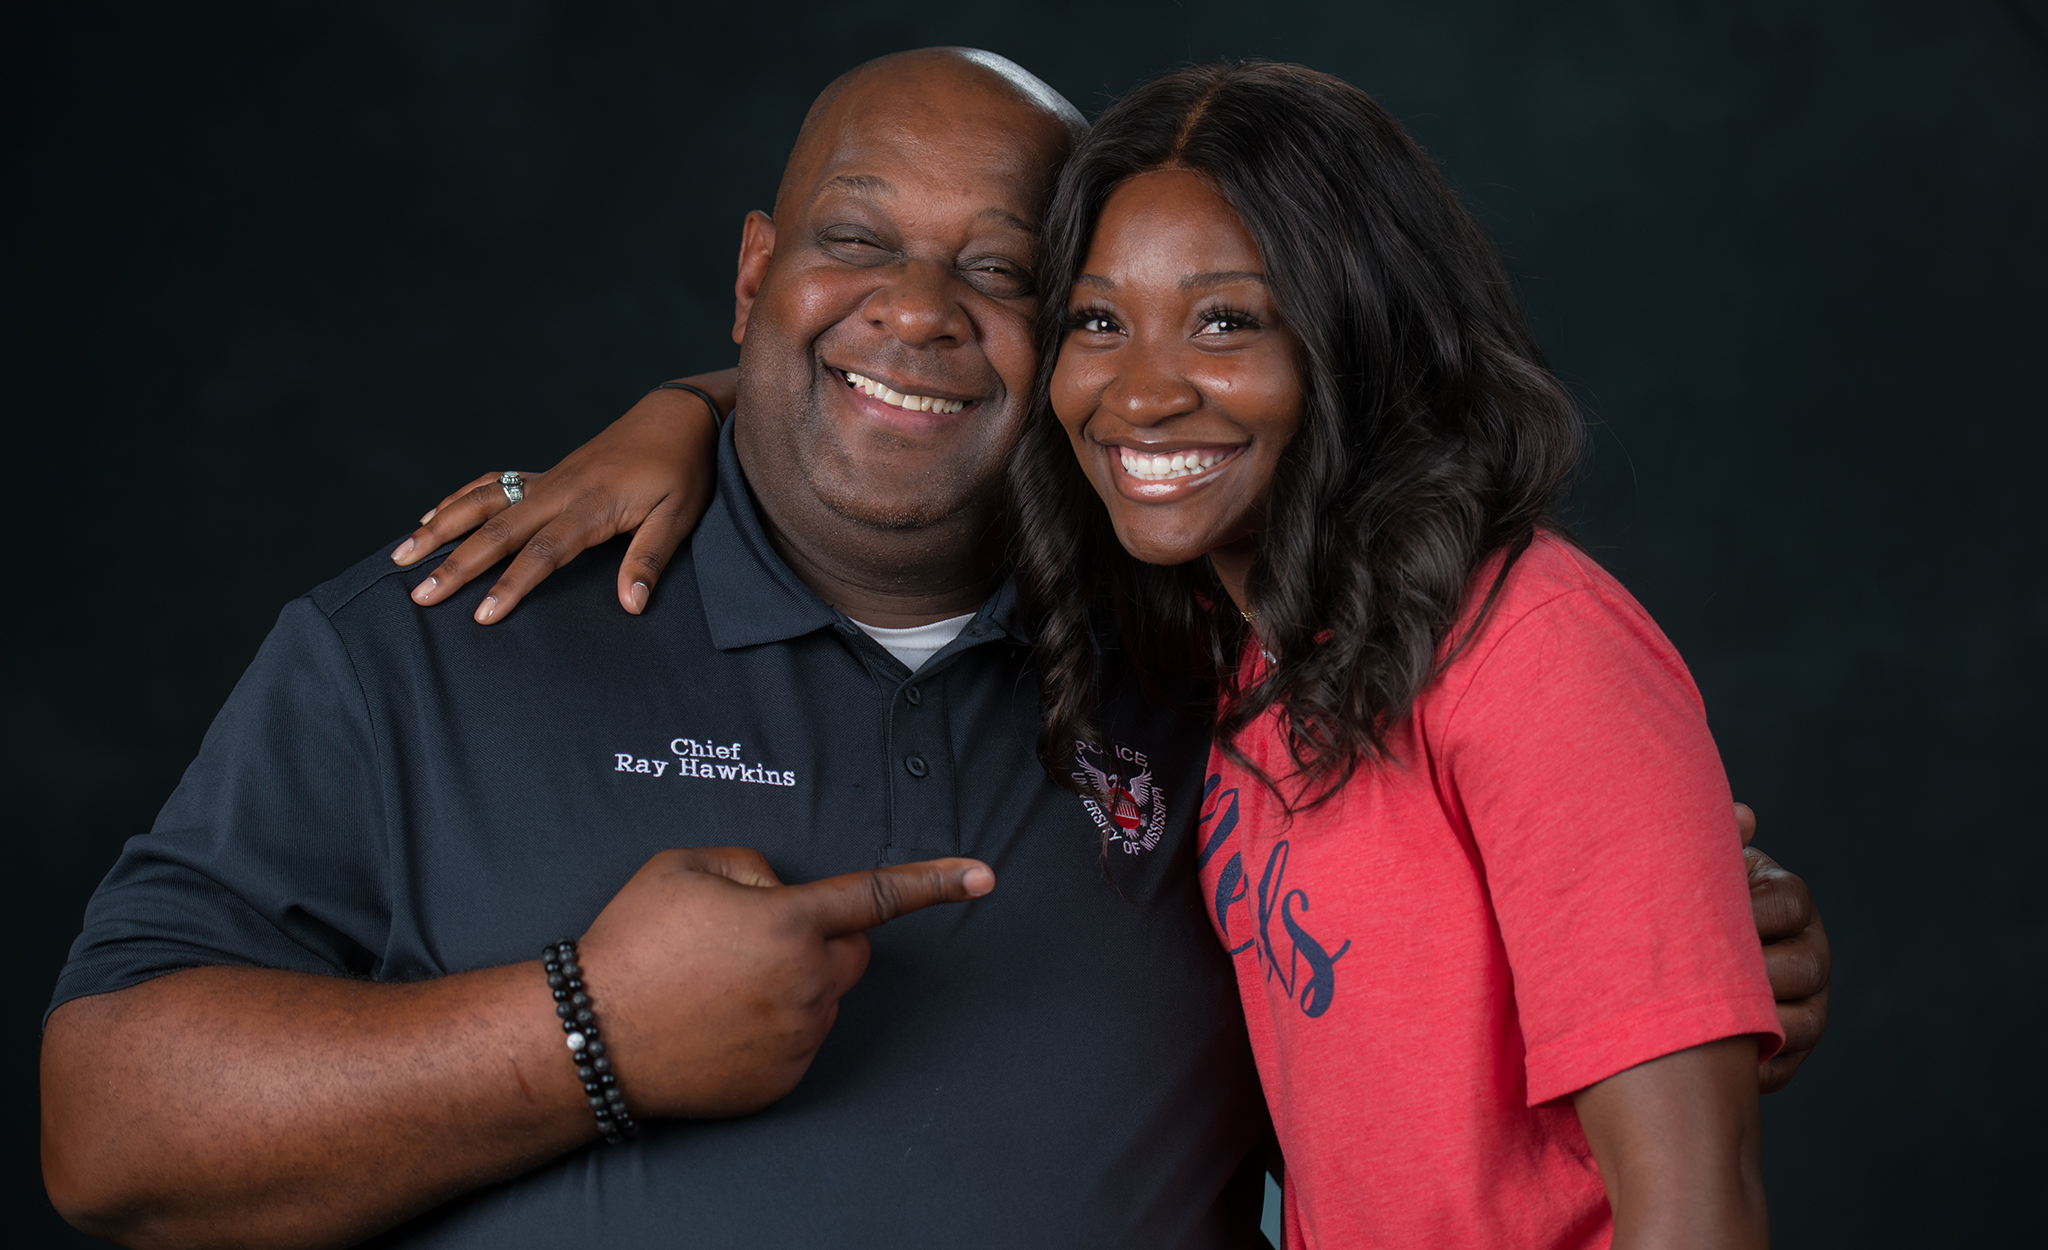 a’Nia Hawkins (right), an allied health studies major, says there’s no place like Ole Miss and is happy to have followed her dad, retired UPD Chief Ray Hawkins (BA 01), there. Photo by Kevin Bain/Ole Miss Digital Imaging Services